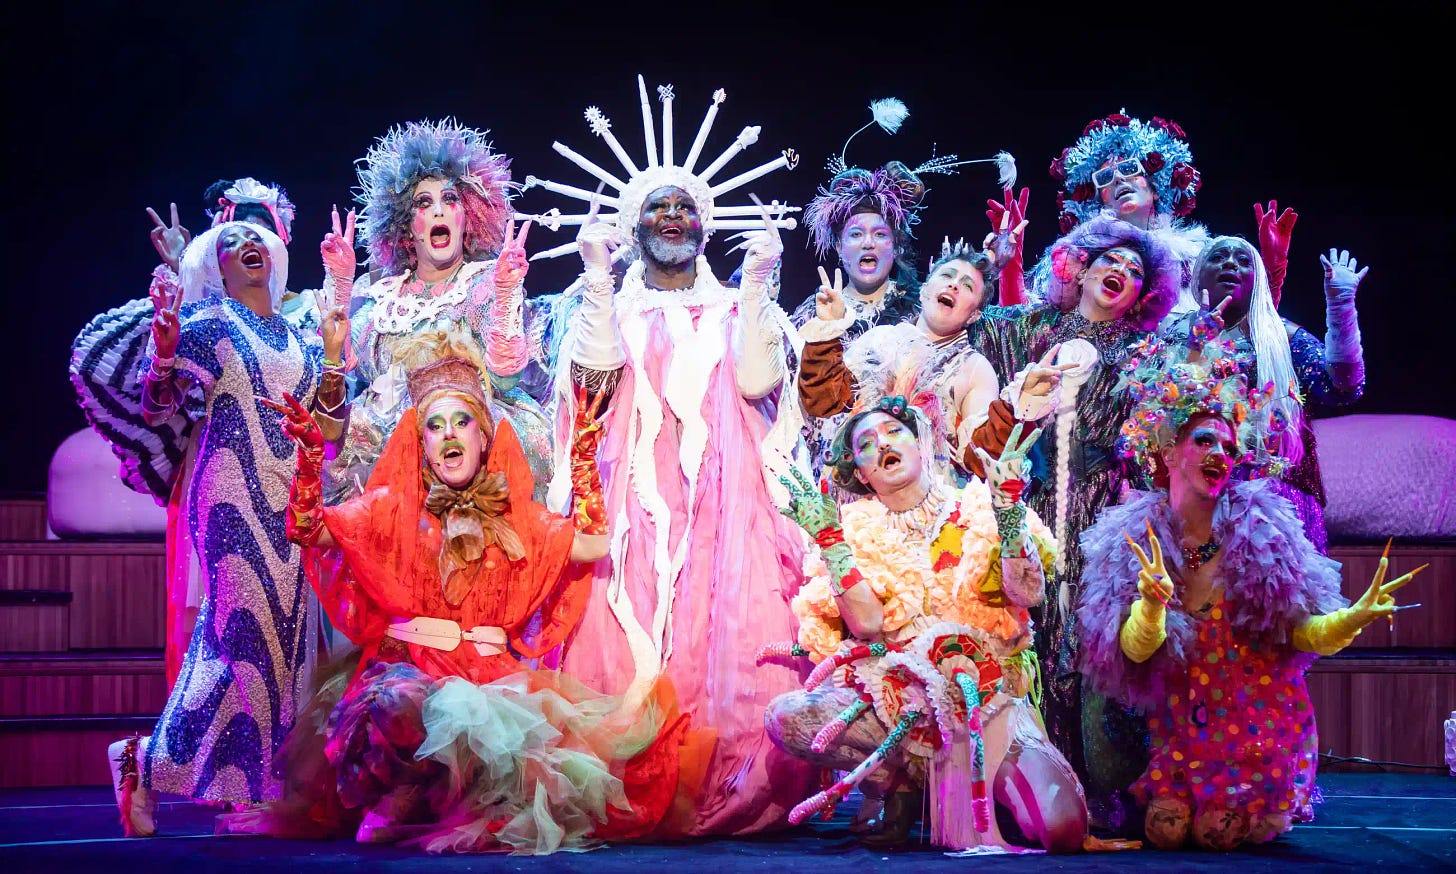 Le Gateau Chocolat, a black man wearing a spiked white headdress and a pink and white gown stands at the center of a colorful, multiracial cast of singers in extravagant costumes, including Taylor Mac. They are all holding up fingers in the air as they gesture and sing.